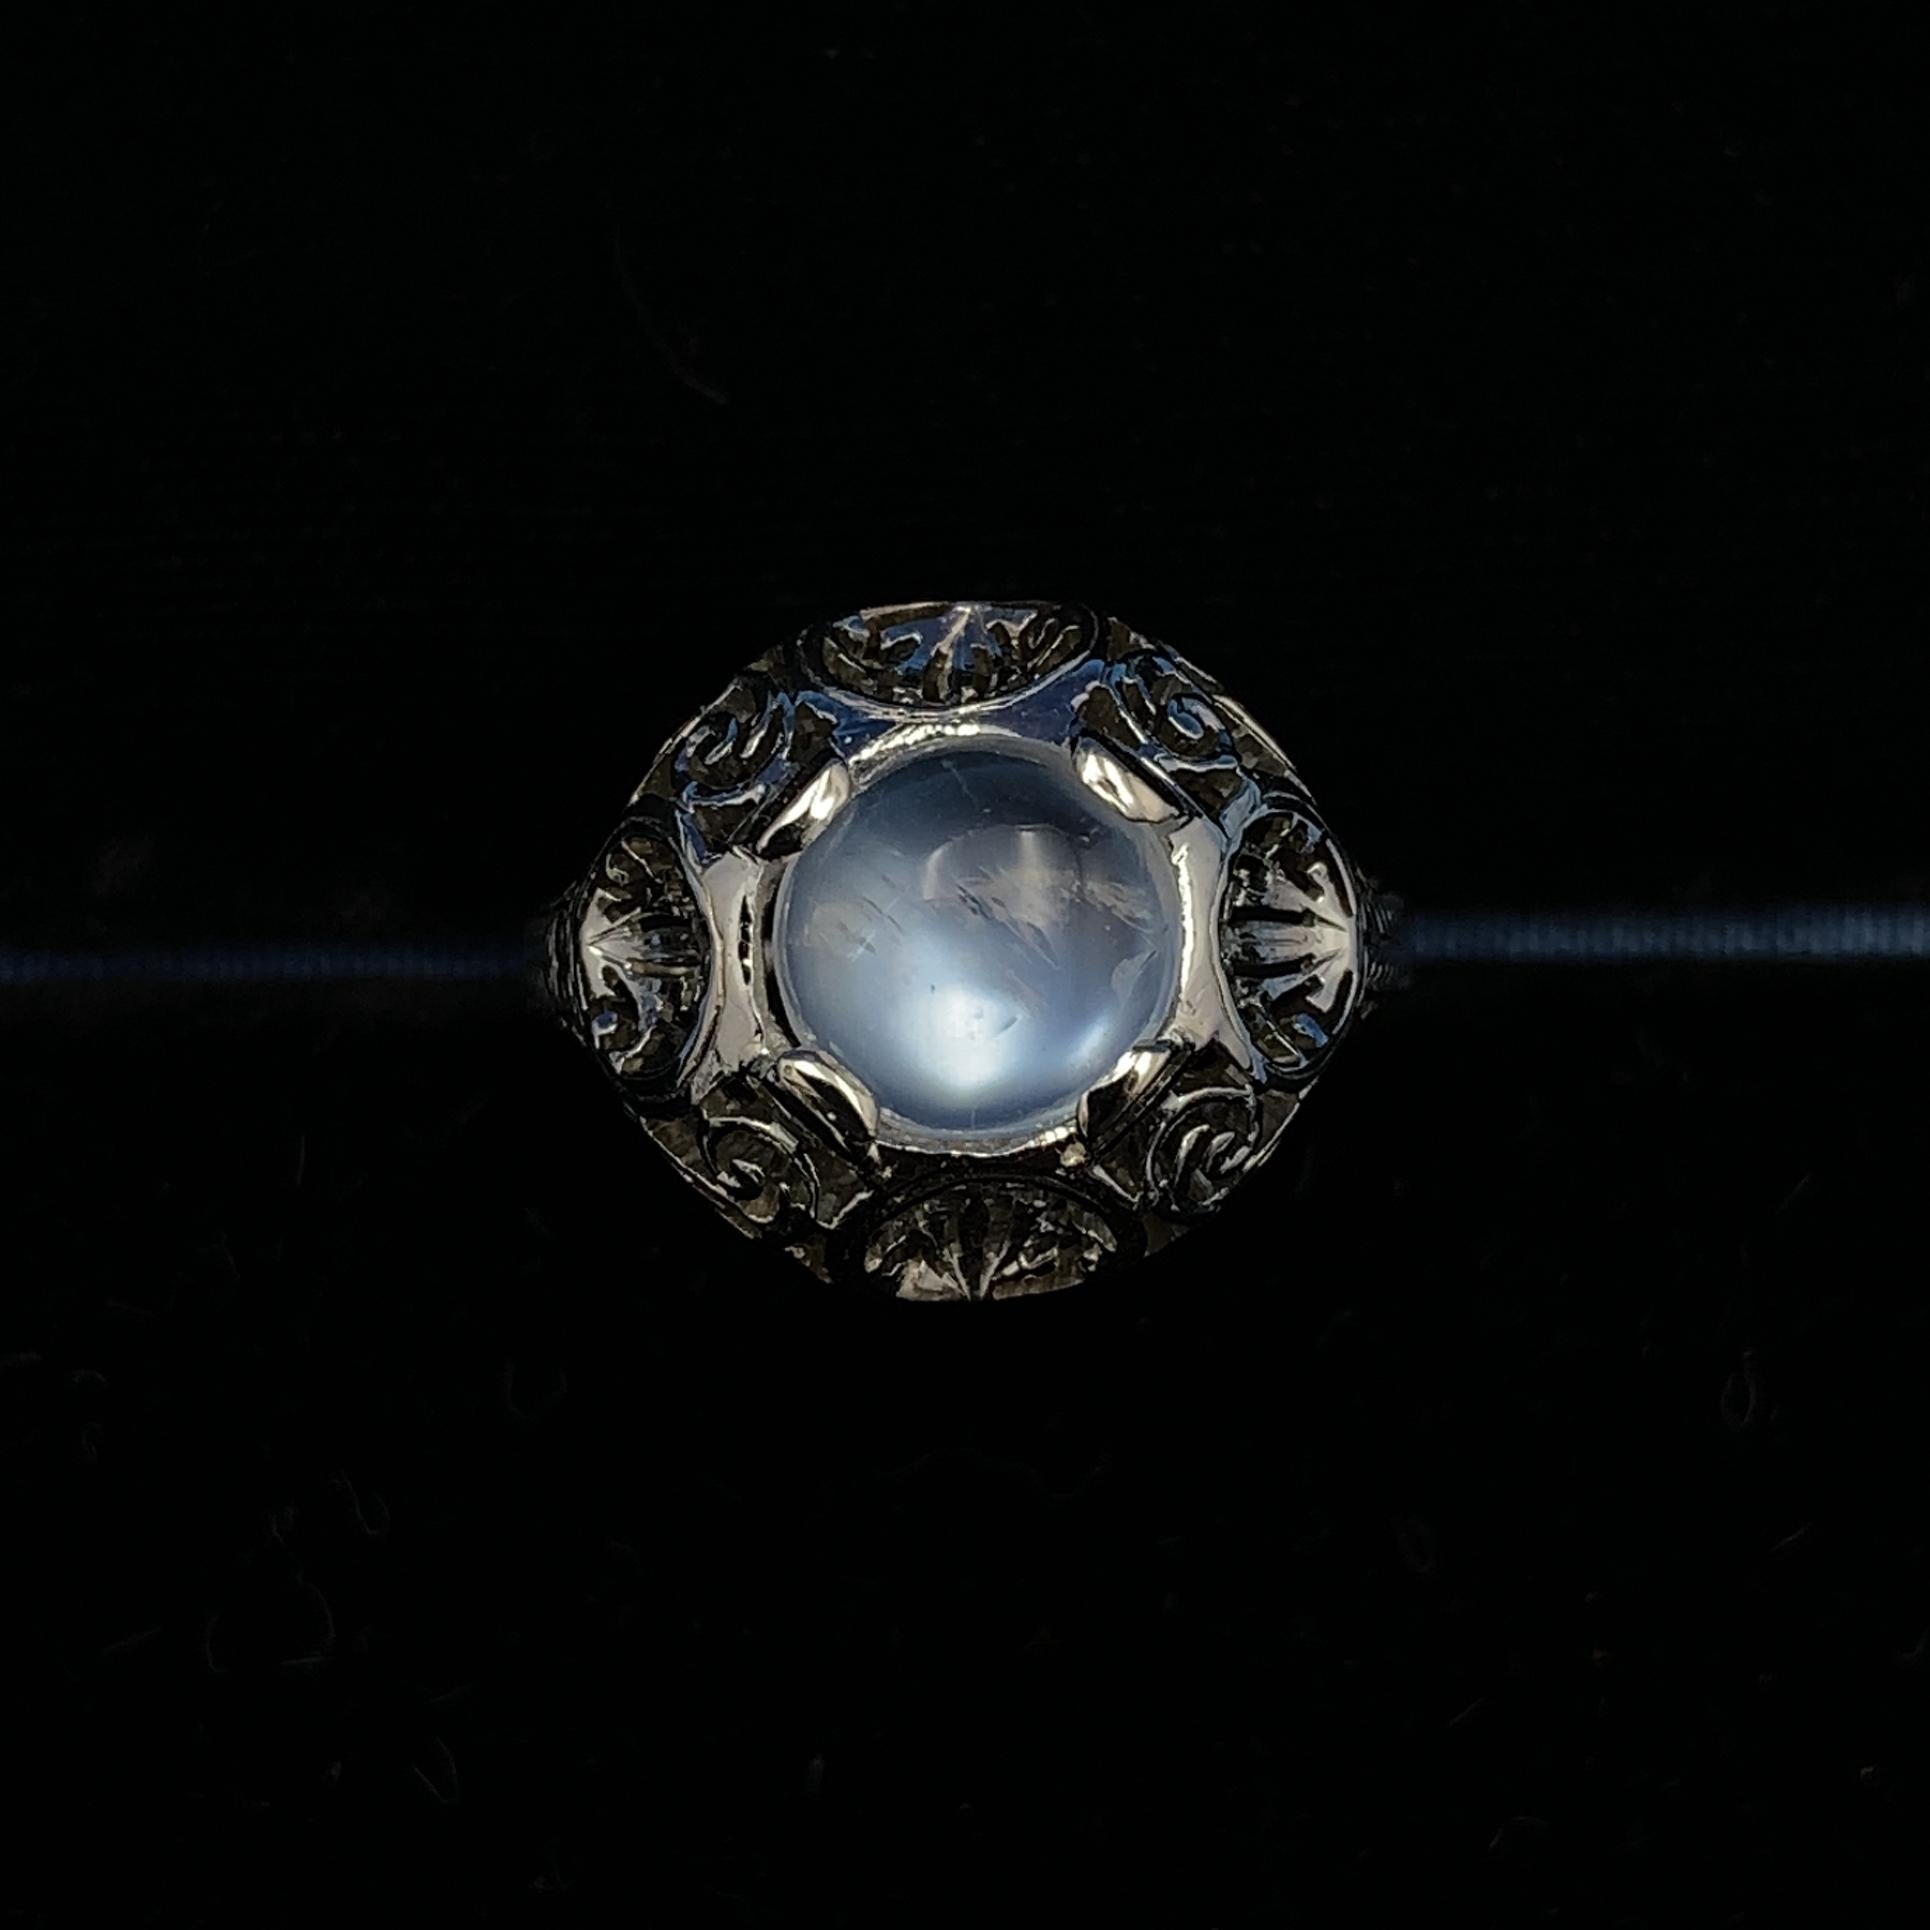 18k white gold filigree ring with a blue flash round moonstone. The mounting is Art Deco with hand piercing. The moonstone  weighs 1.66 carats and measures about 8mm. The ring fits a size 7 3/4 finger and weighs 3dwt. It dates from the 1920's.